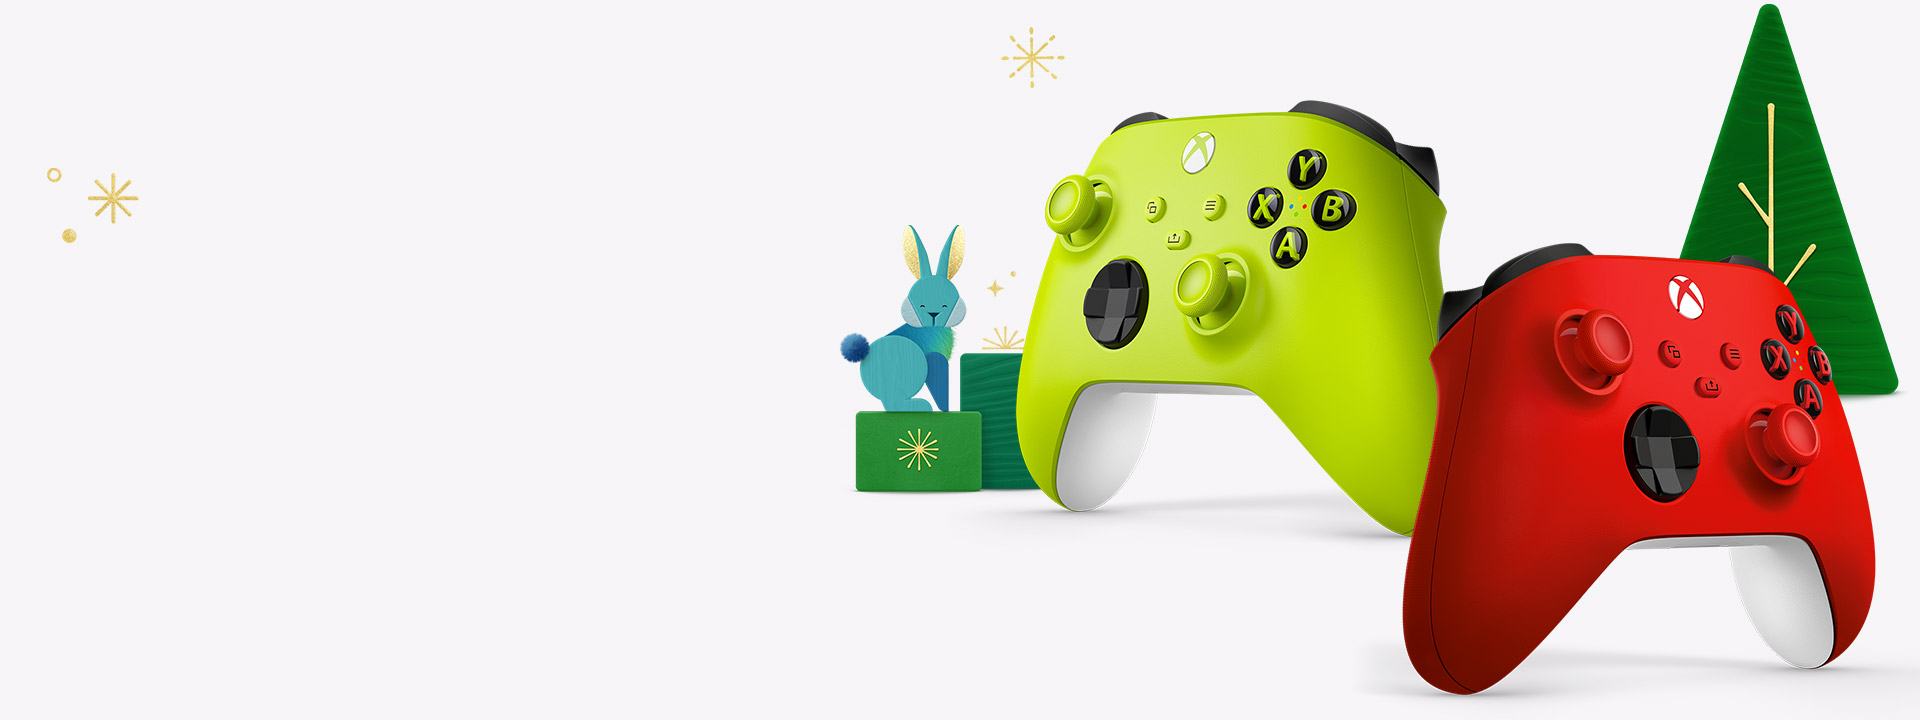 Two Xbox Wireless Controllers surrounded by holiday elements, including a rabbit, gifts, and a tree.